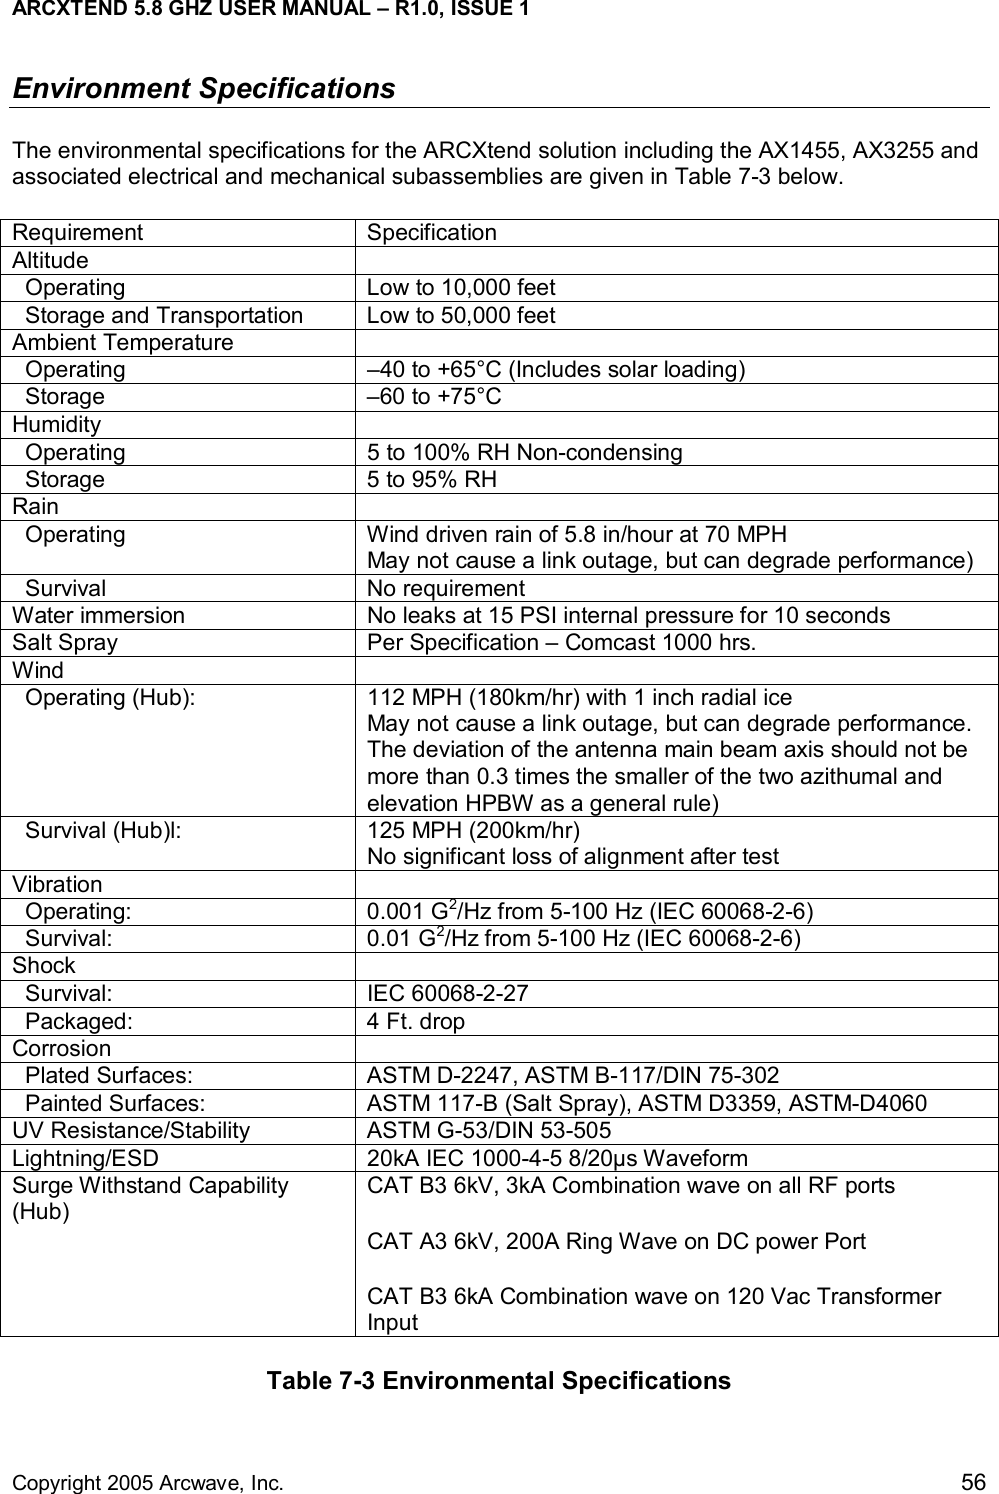 ARCXTEND 5.8 GHZ USER MANUAL – R1.0, ISSUE 1  Copyright 2005 Arcwave, Inc.    56 Environment Specifications The environmental specifications for the ARCXtend solution including the AX1455, AX3255 and associated electrical and mechanical subassemblies are given in Table 7-3 below. Requirement Specification Altitude    Operating  Low to 10,000 feet   Storage and Transportation  Low to 50,000 feet Ambient Temperature     Operating  –40 to +65°C (Includes solar loading)   Storage   –60 to +75°C Humidity    Operating   5 to 100% RH Non-condensing   Storage   5 to 95% RH Rain    Operating  Wind driven rain of 5.8 in/hour at 70 MPH   May not cause a link outage, but can degrade performance)   Survival  No requirement Water immersion   No leaks at 15 PSI internal pressure for 10 seconds Salt Spray  Per Specification – Comcast 1000 hrs. Wind         Operating (Hub):    112 MPH (180km/hr) with 1 inch radial ice  May not cause a link outage, but can degrade performance. The deviation of the antenna main beam axis should not be more than 0.3 times the smaller of the two azithumal and elevation HPBW as a general rule)   Survival (Hub)l:        125 MPH (200km/hr)  No significant loss of alignment after test Vibration    Operating:  0.001 G2/Hz from 5-100 Hz (IEC 60068-2-6)   Survival:  0.01 G2/Hz from 5-100 Hz (IEC 60068-2-6) Shock      Survival:     IEC 60068-2-27   Packaged:   4 Ft. drop Corrosion    Plated Surfaces:     ASTM D-2247, ASTM B-117/DIN 75-302   Painted Surfaces:     ASTM 117-B (Salt Spray), ASTM D3359, ASTM-D4060 UV Resistance/Stability  ASTM G-53/DIN 53-505 Lightning/ESD  20kA IEC 1000-4-5 8/20µs Waveform Surge Withstand Capability (Hub) CAT B3 6kV, 3kA Combination wave on all RF ports CAT A3 6kV, 200A Ring Wave on DC power Port CAT B3 6kA Combination wave on 120 Vac Transformer Input Table 7-3 Environmental Specifications 